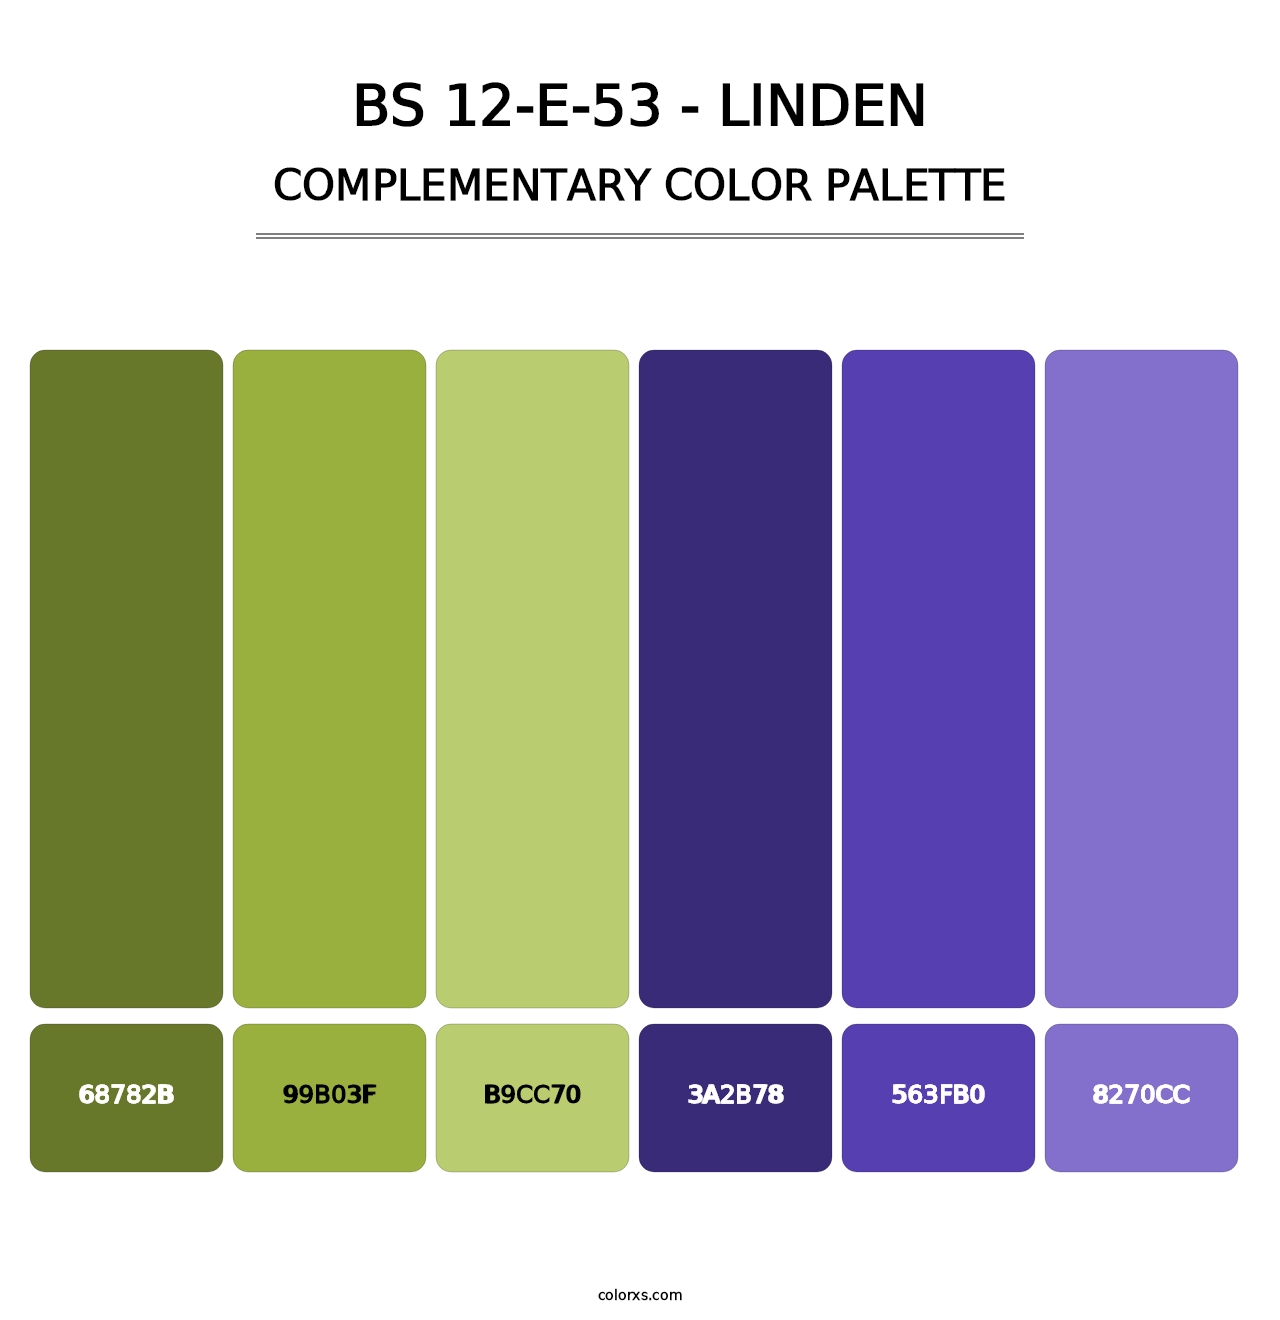 BS 12-E-53 - Linden - Complementary Color Palette